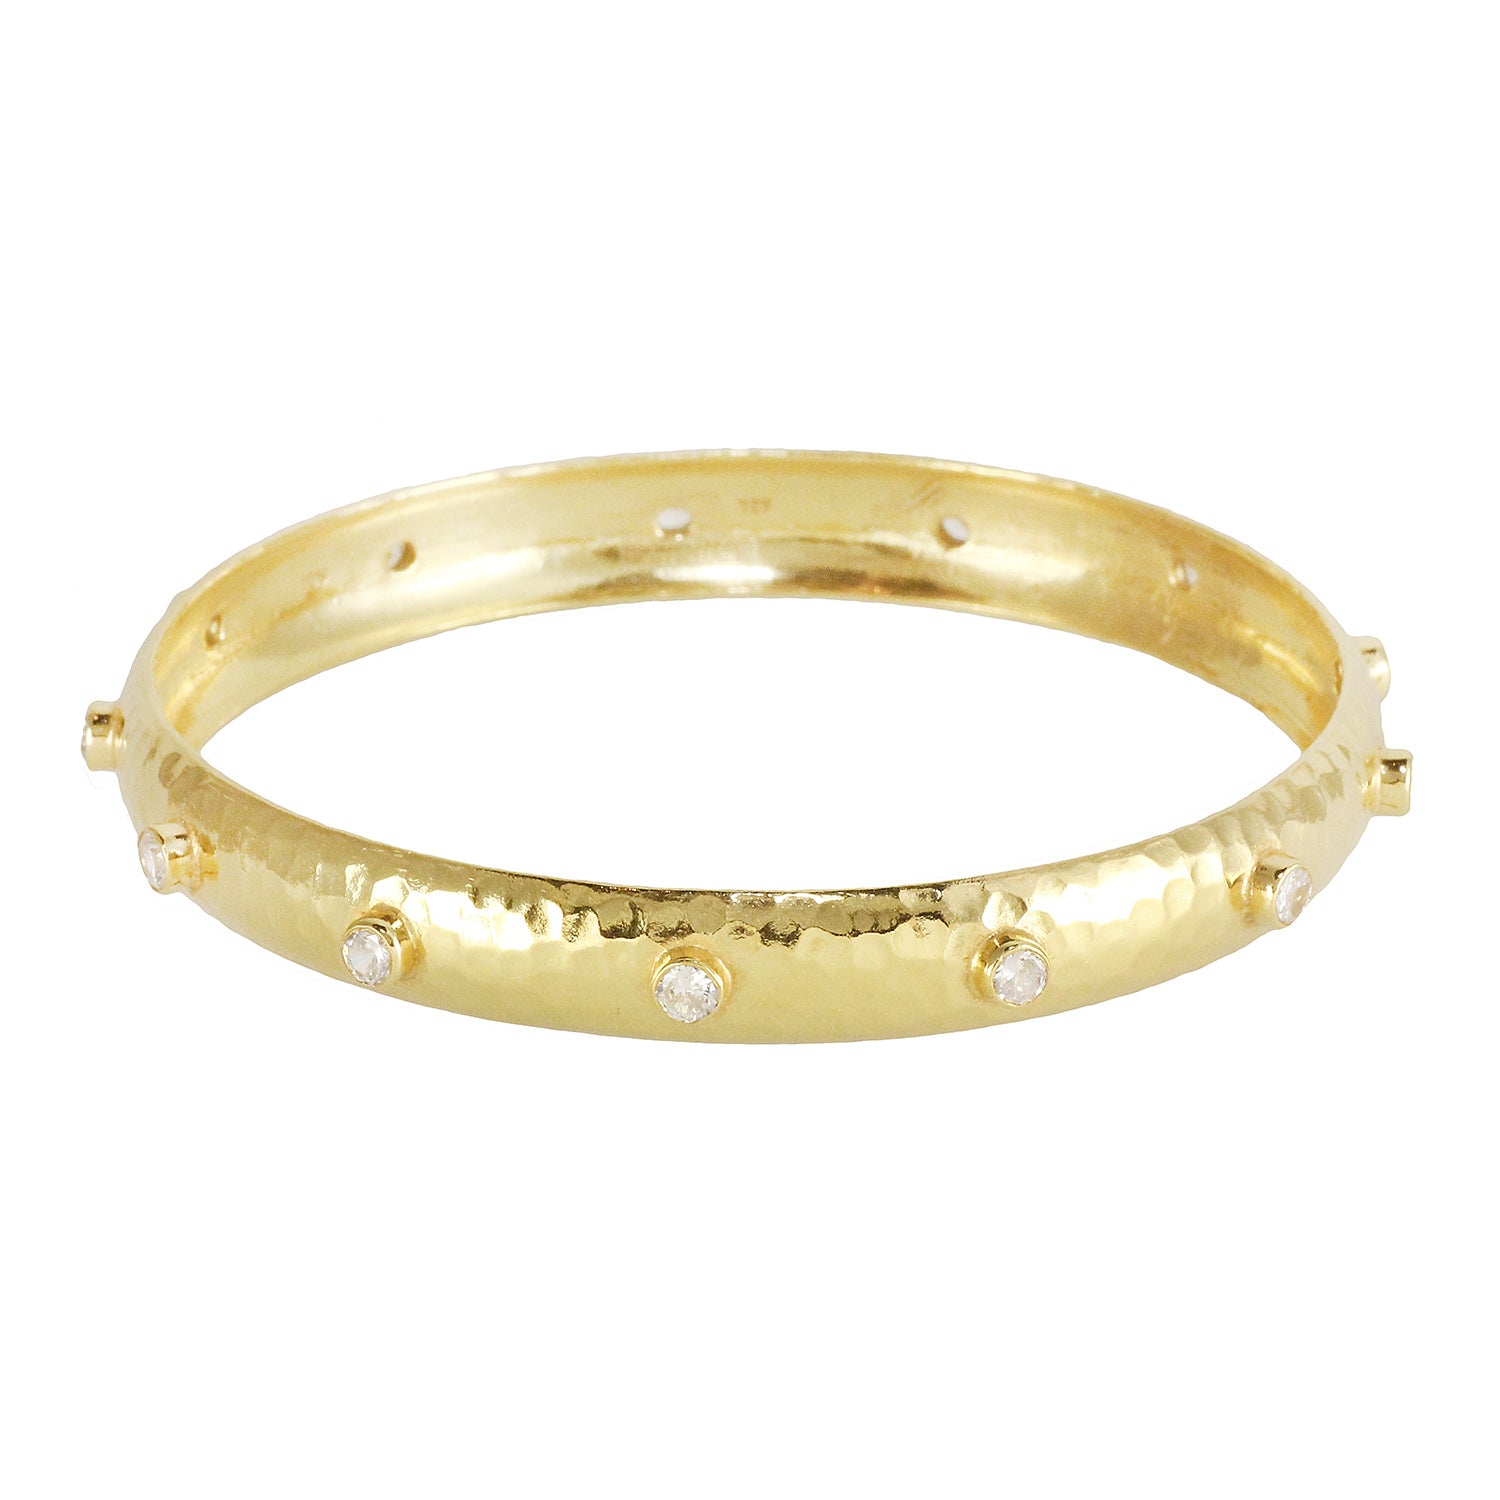 Classic silver gold plated bracelet bangle with white topas stones, made in India